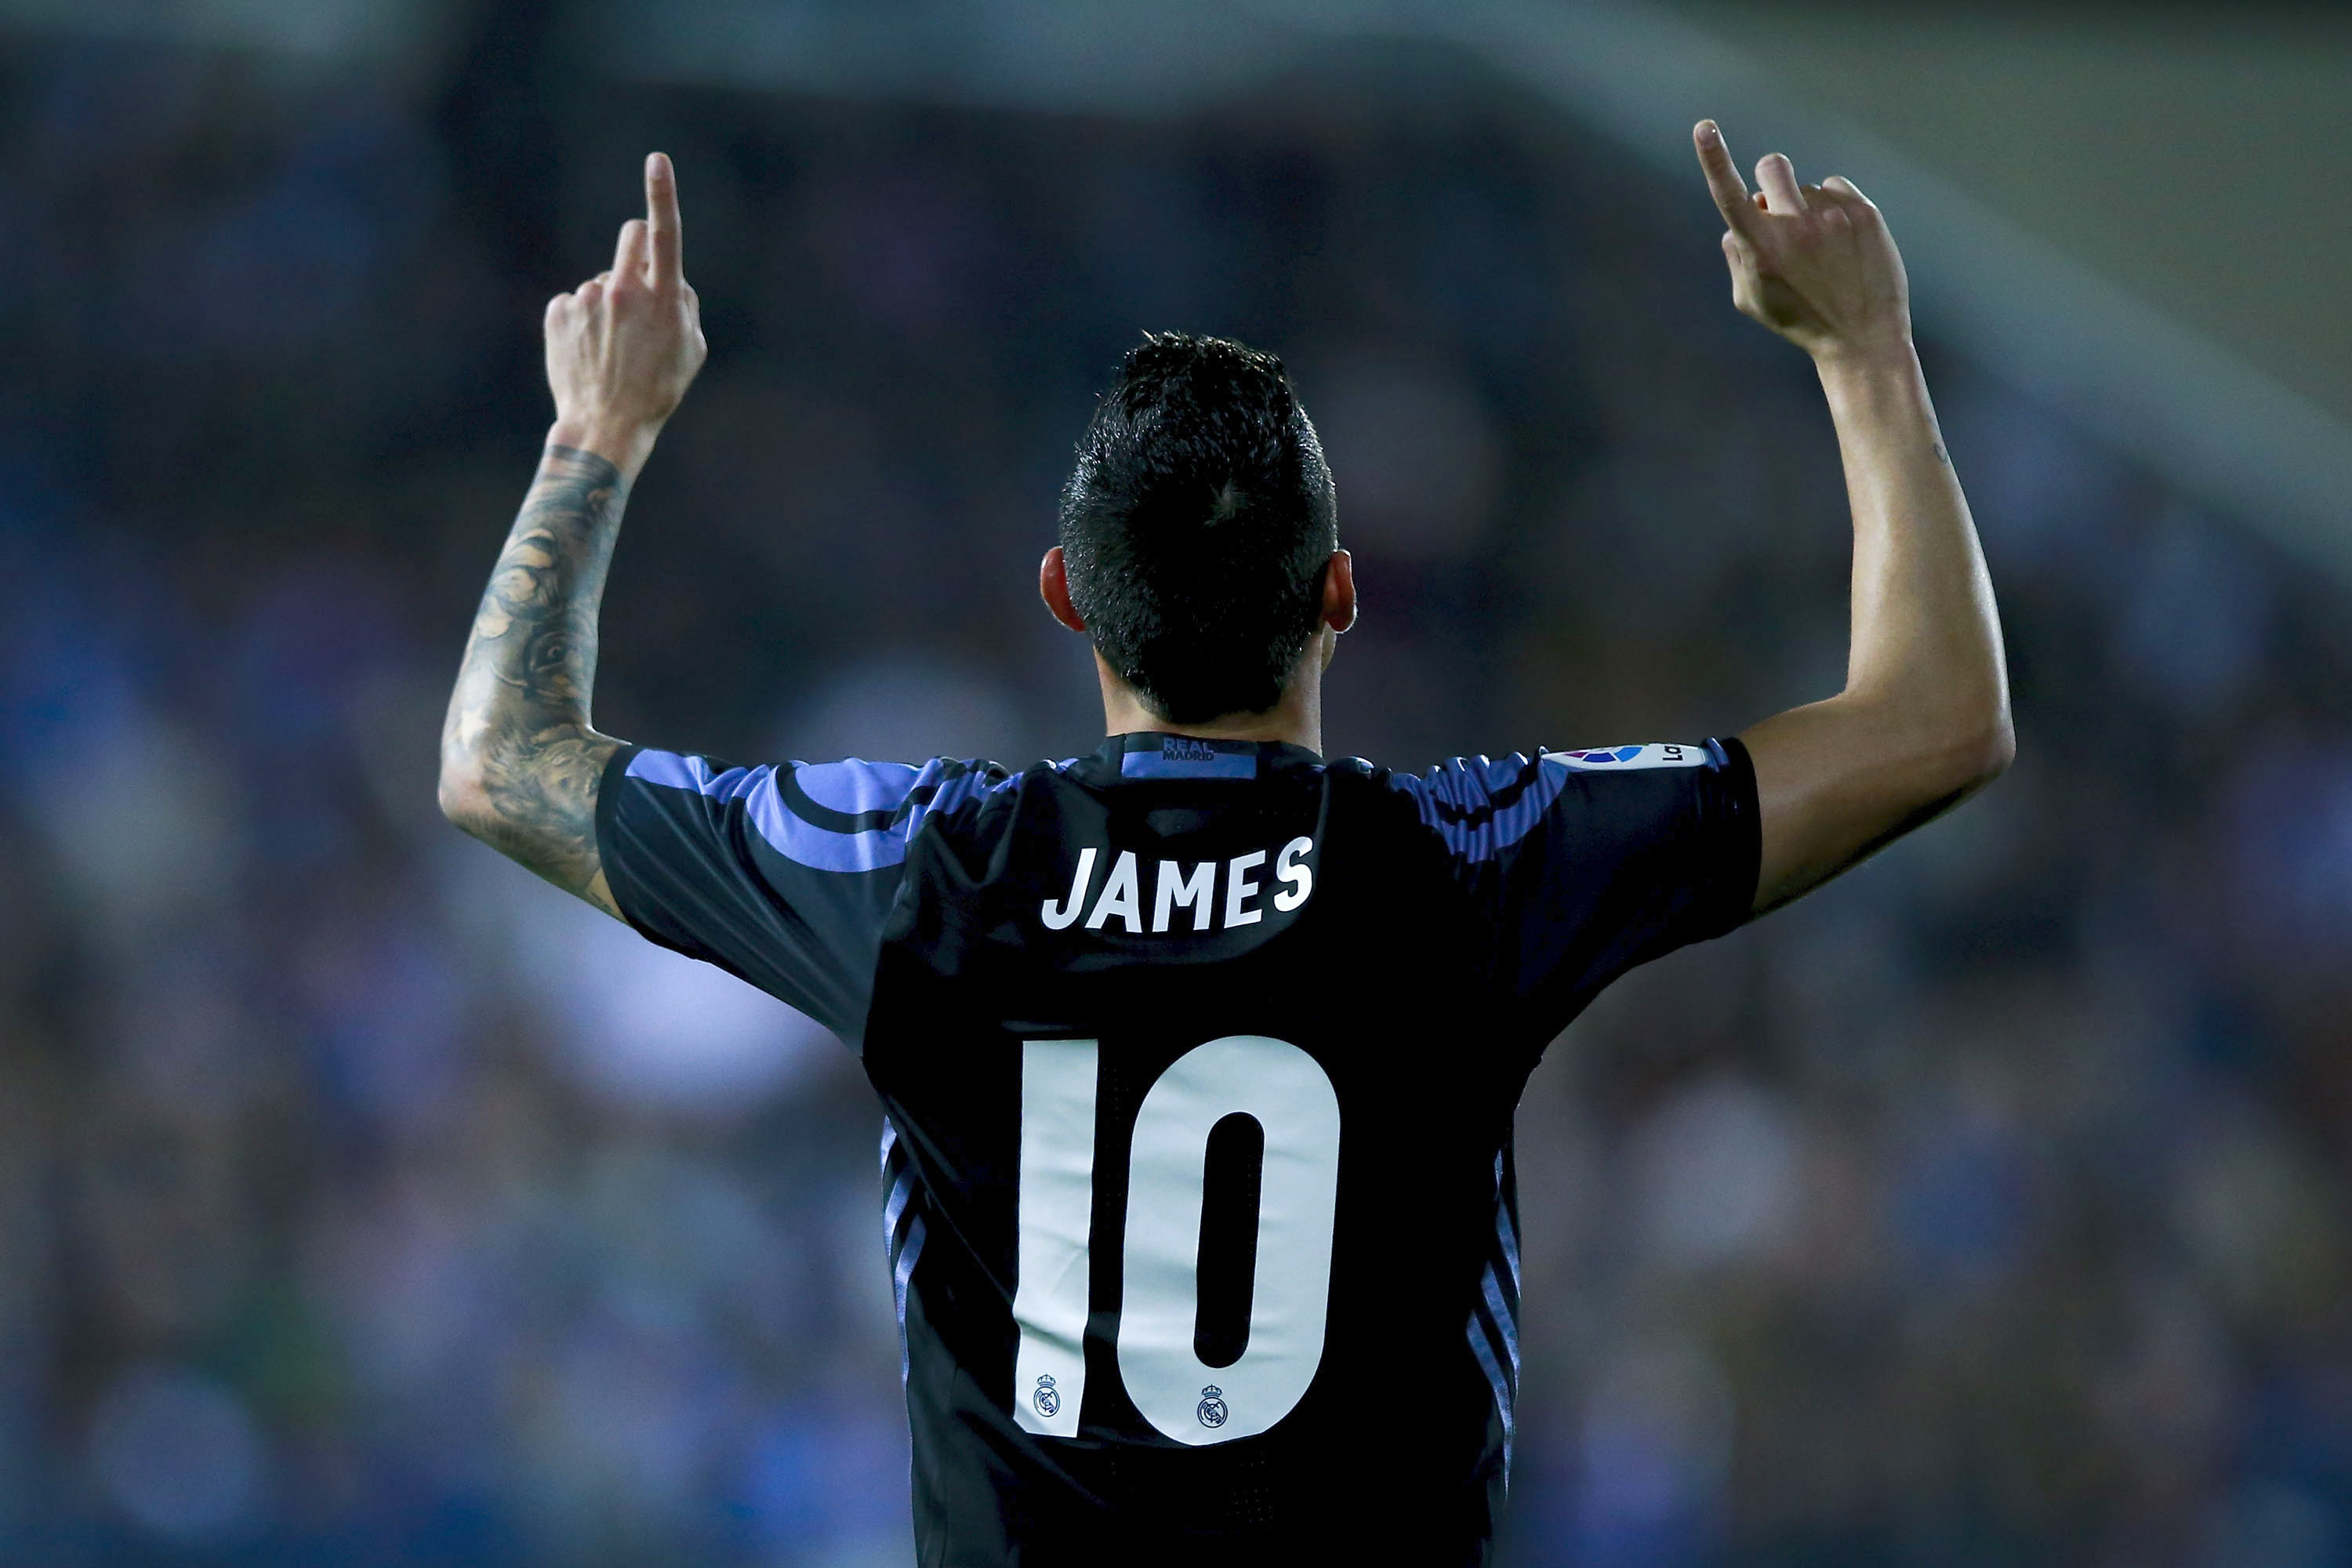 LEGANES, SPAIN - APRIL 05:  James Rodriguez of Real Madrid CF celebrates scoring their opening goal during the La Liga match between CD Leganes and Real Madrid CF at Estadio Municipal de Butarque on April 5, 2017 in Leganes, Spain.  (Photo by Gonzalo Arroyo Moreno/Getty Images)